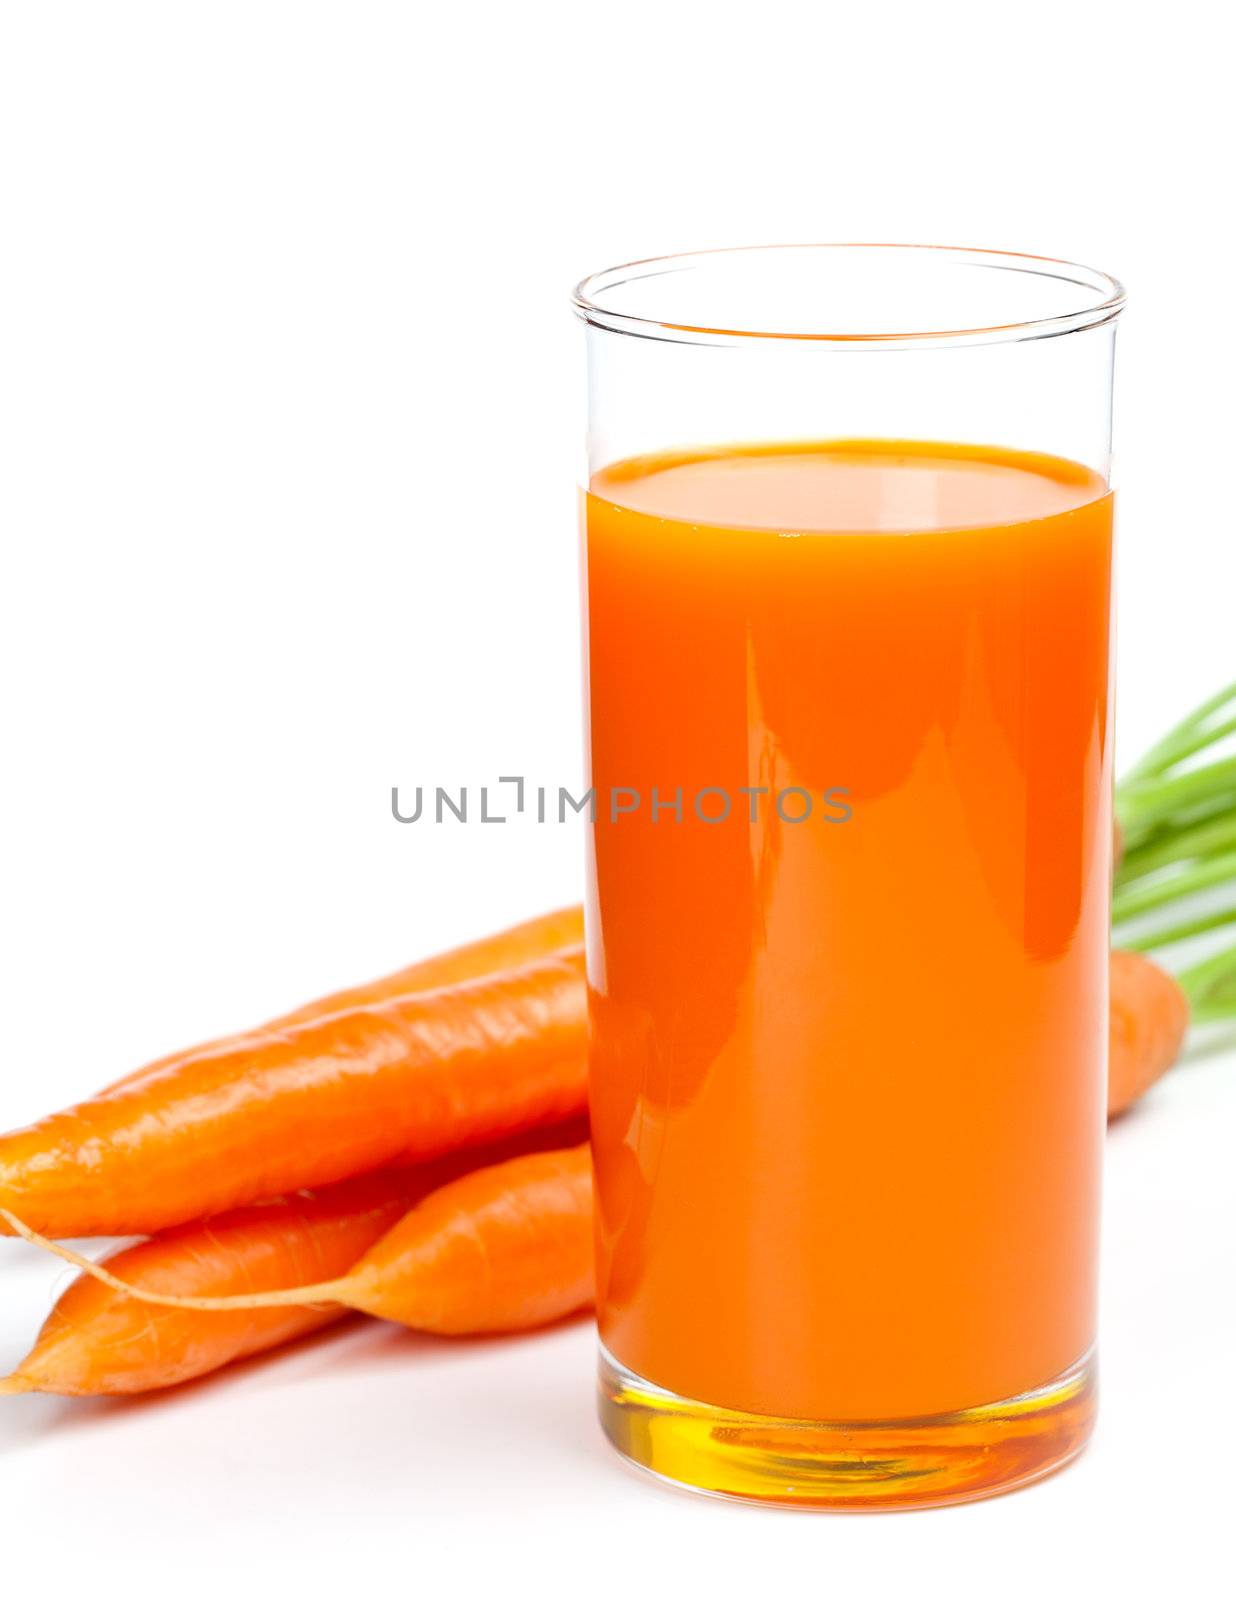 Carrot juice and fresh carrot, isolated on white background by motorolka